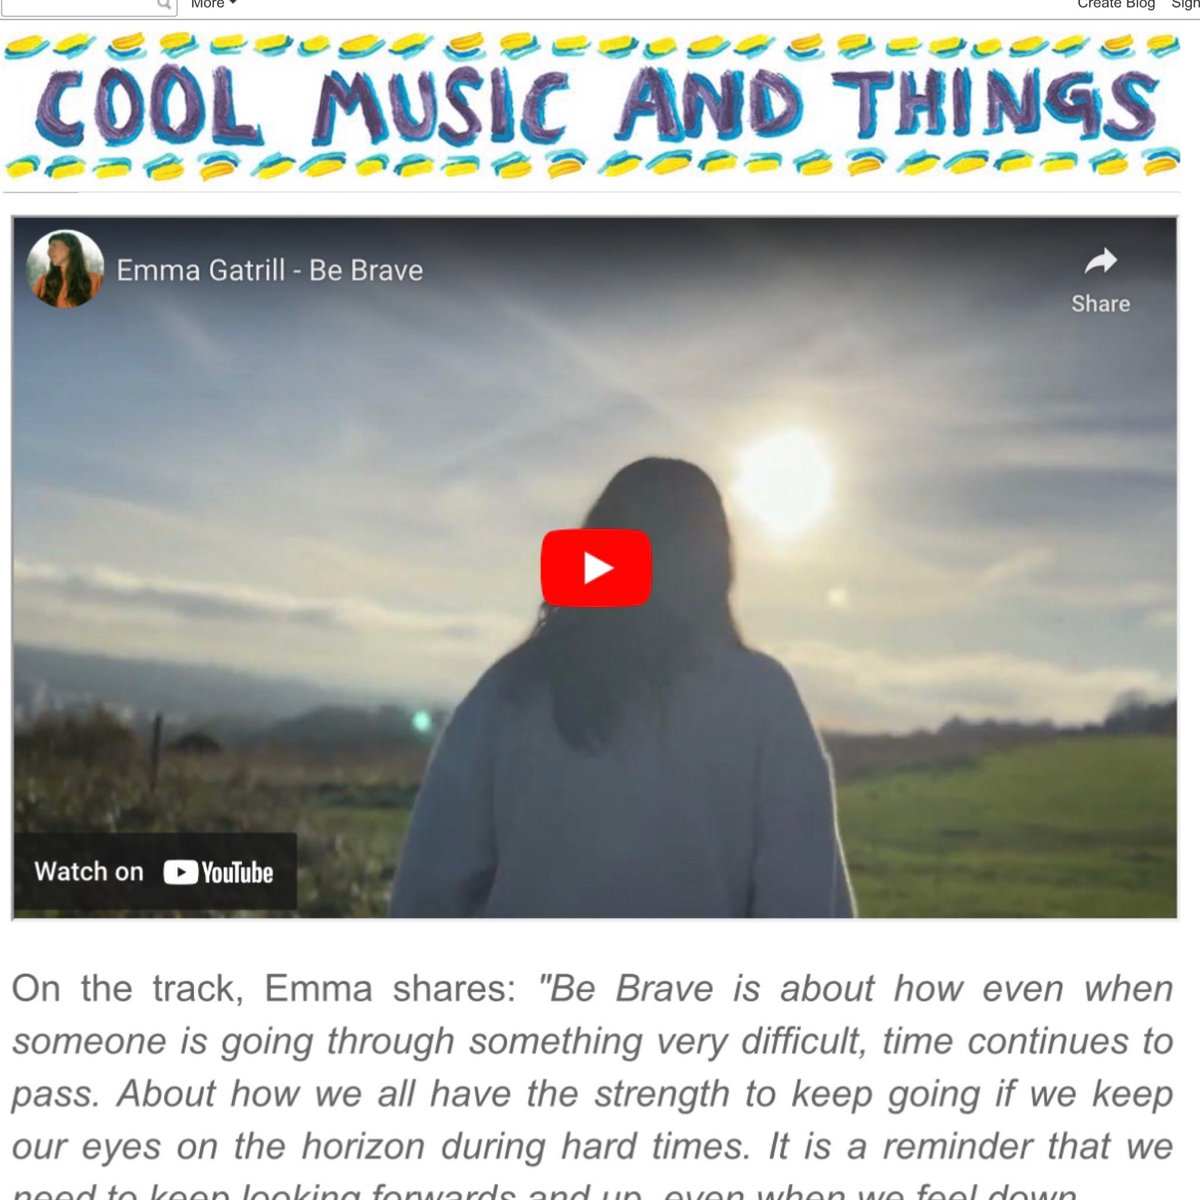 The video for my new track ‘Be Brave’ is online now! Big thanks to Meg at @coolmusicthings for the premiere! Check it out here: coolmusicandthings.co.uk/?m=1